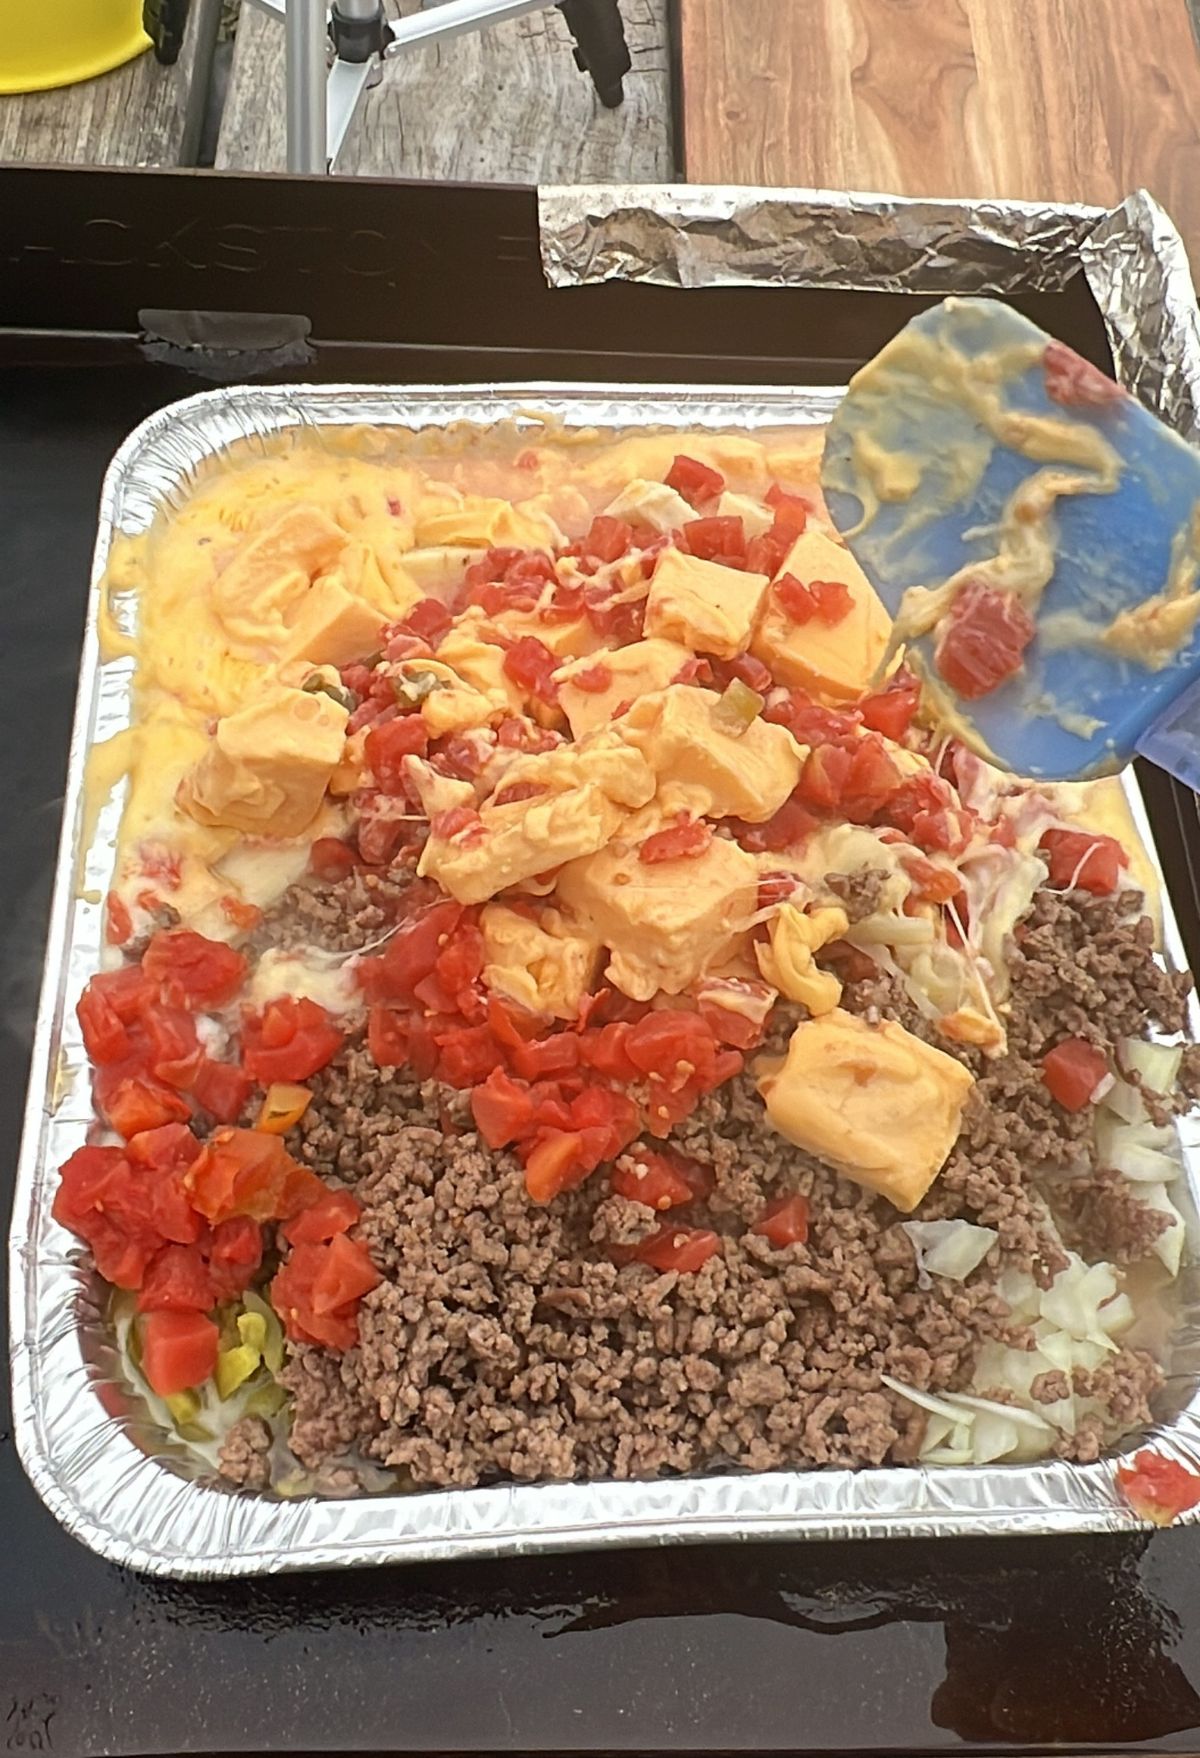 A tray full of food on a table with a spatula.